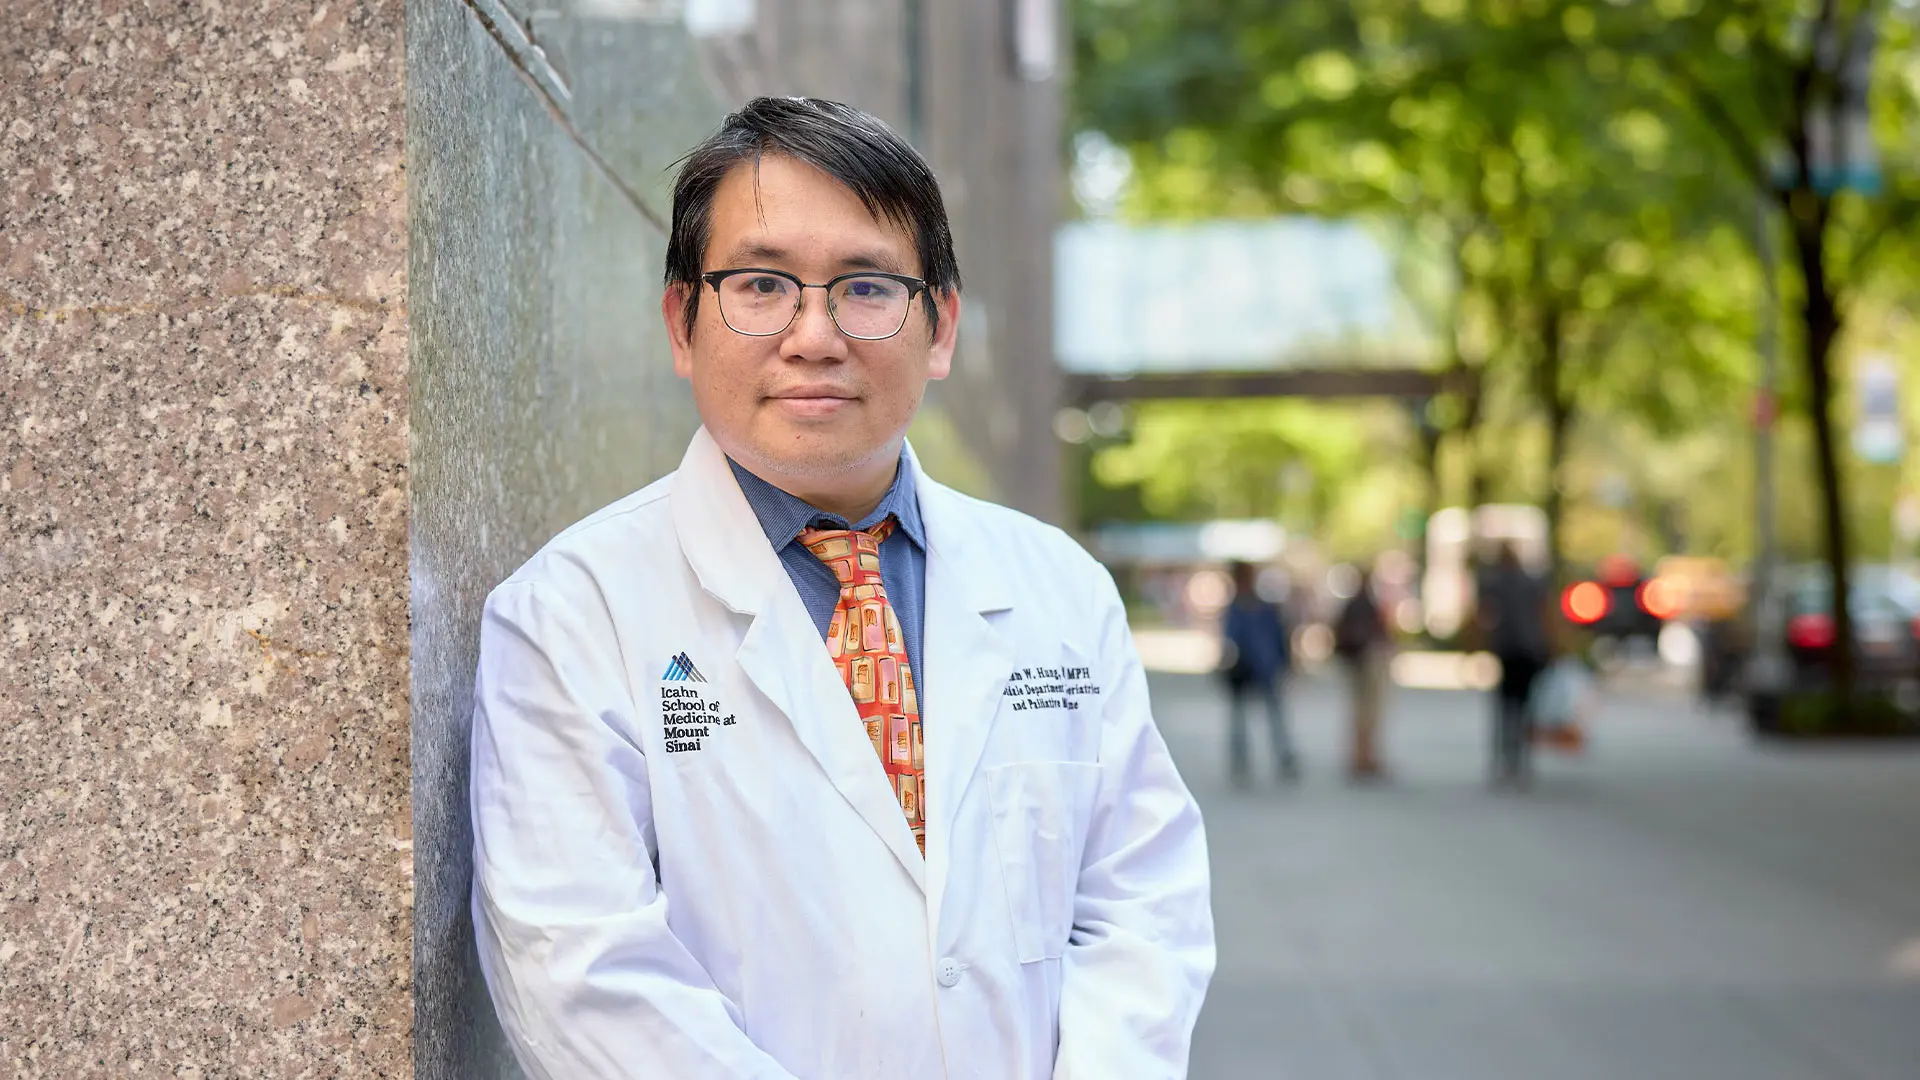 “We want to integrate the innovative approaches that Mount Sinai has developed in palliative care into the care of veterans both at the Bronx VA and throughout the national VA health care system,” says William Hung, MD, MPH, Professor, Brookdale Department of Geriatrics and Palliative Medicine at the Icahn School of Medicine at Mount Sinai. 